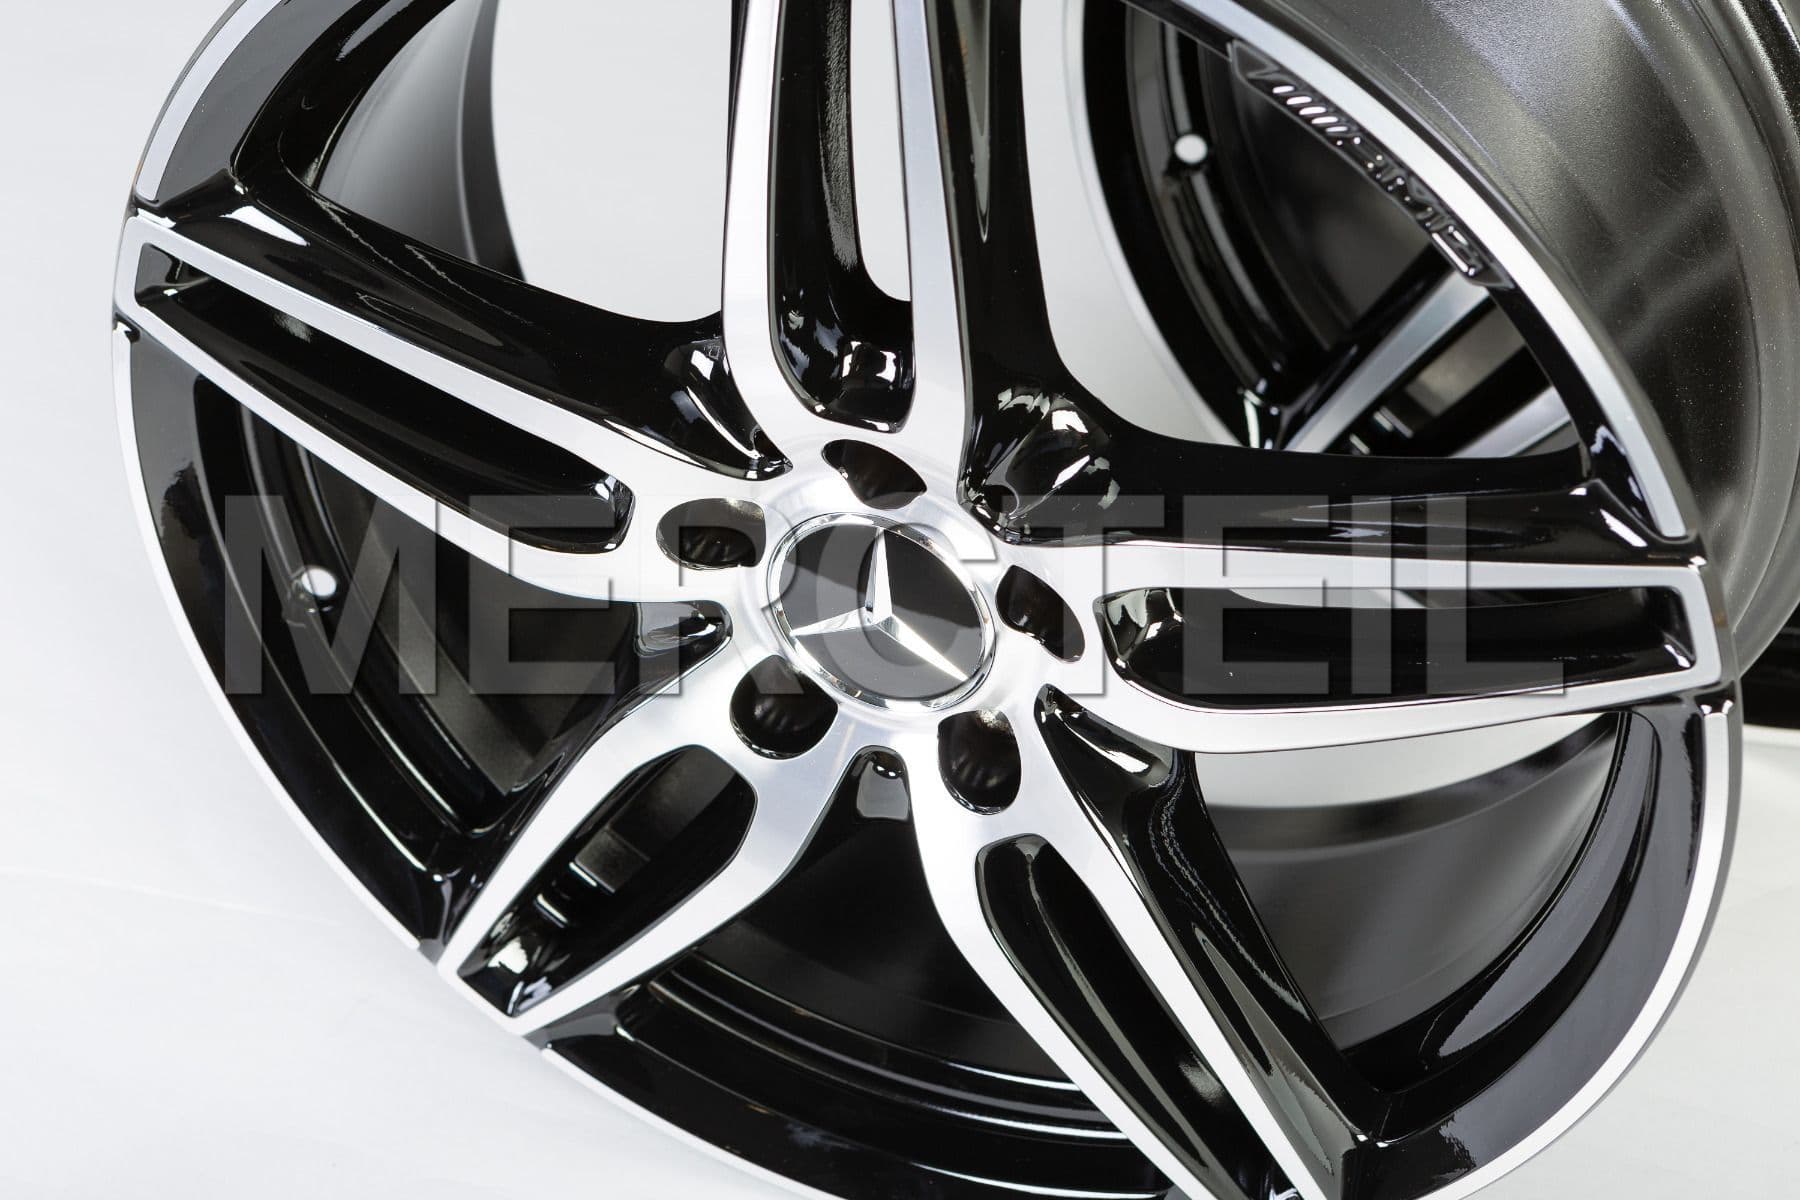 AMG Design Alloy Wheels Kit 19 Inch for Mercedes W213, Coupe C238; A21340120007X23, 2134012000 7X23.